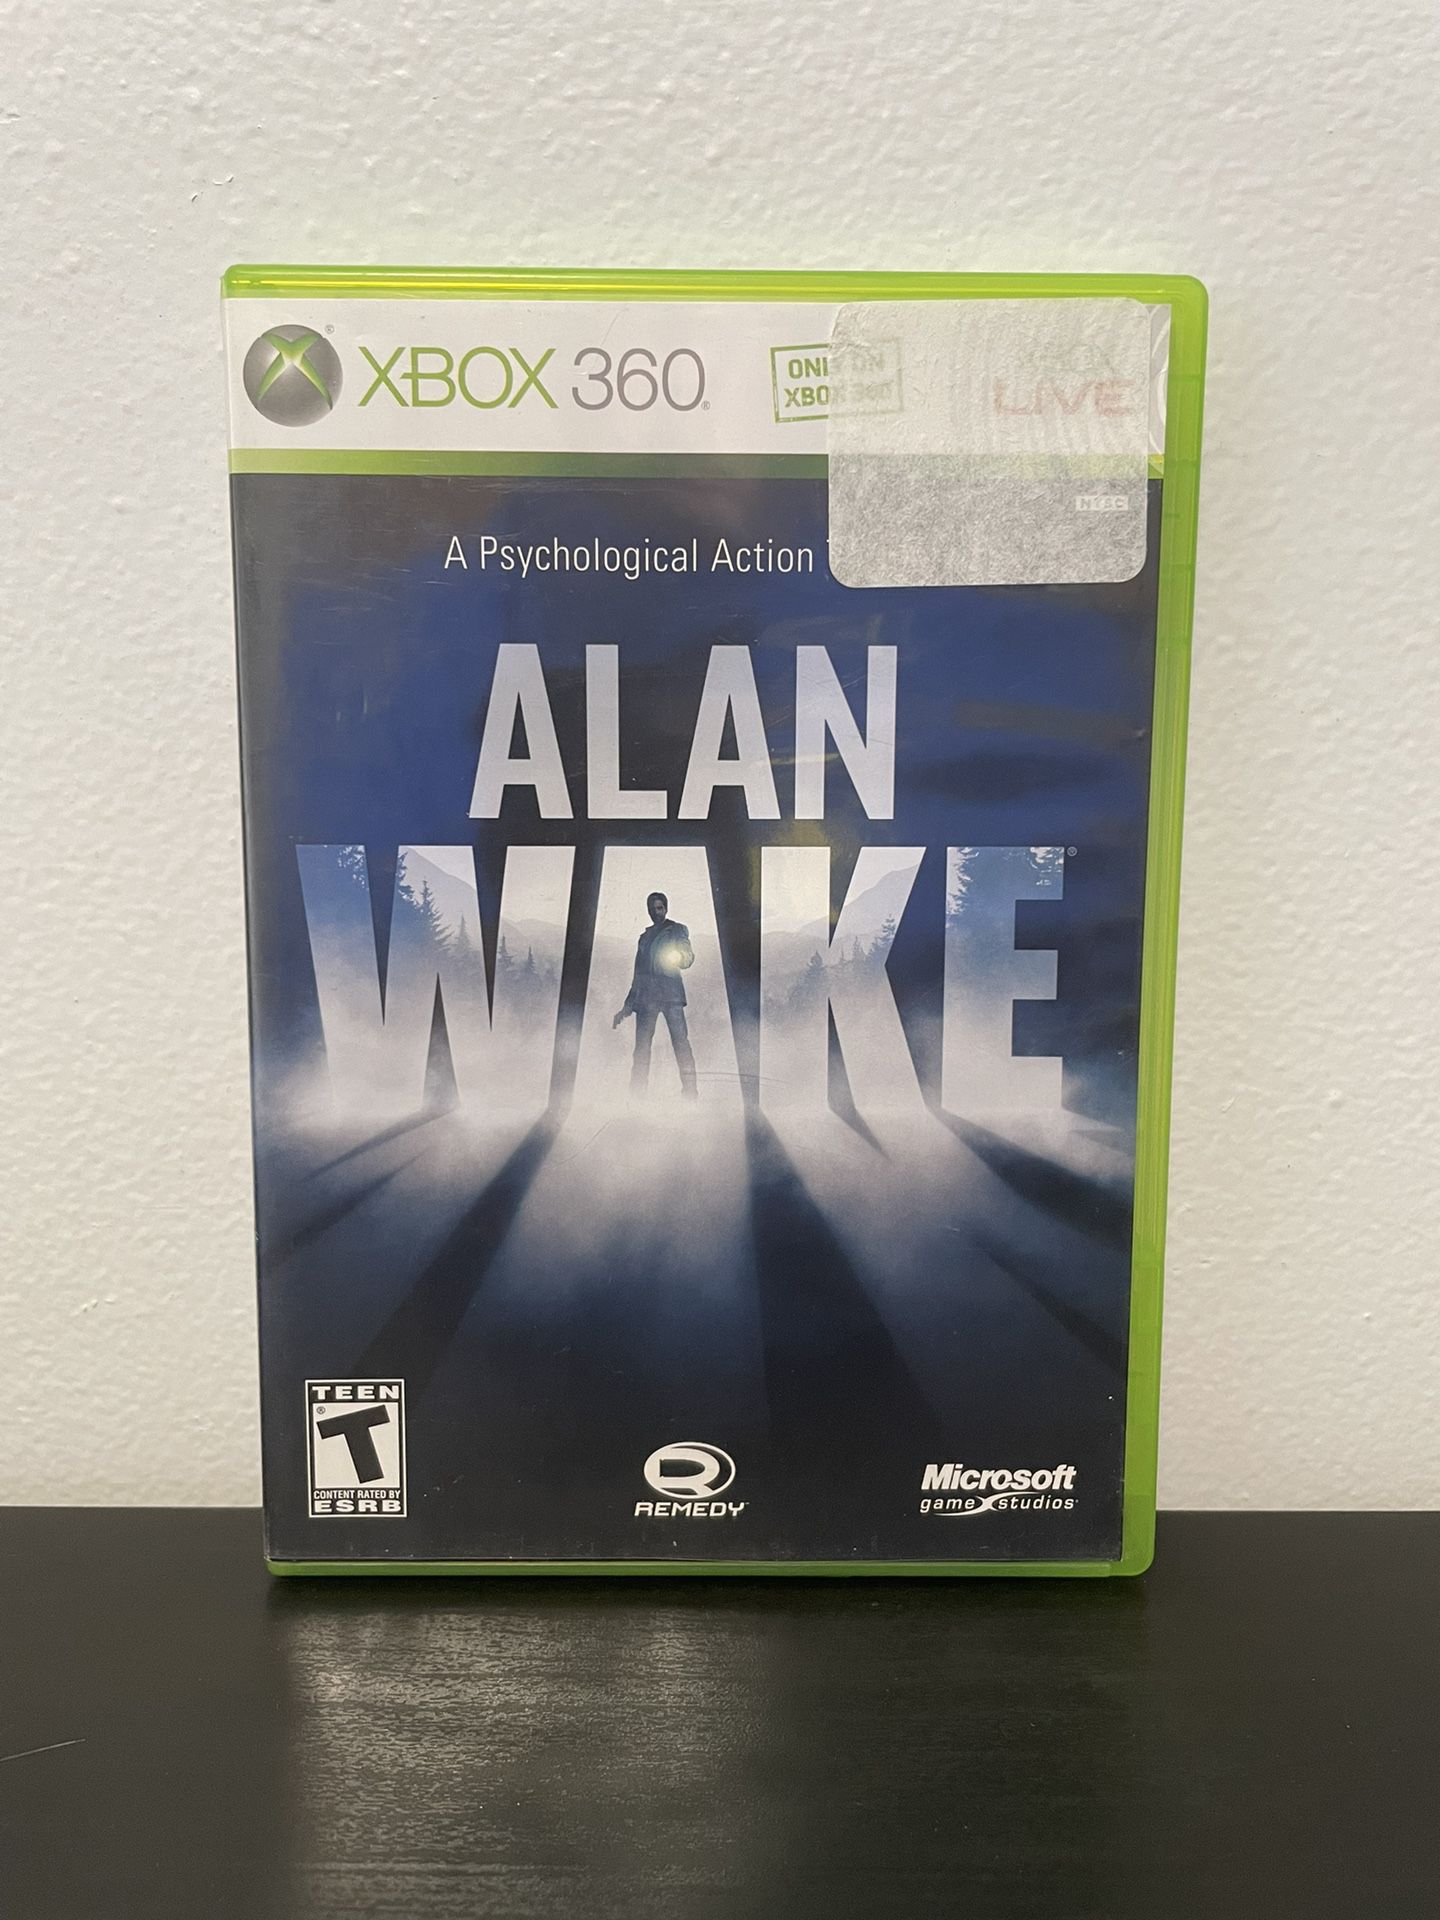 Alan Wake Xbox 360 Like New CIB w/ Manual Video Game Physiological Action RPG